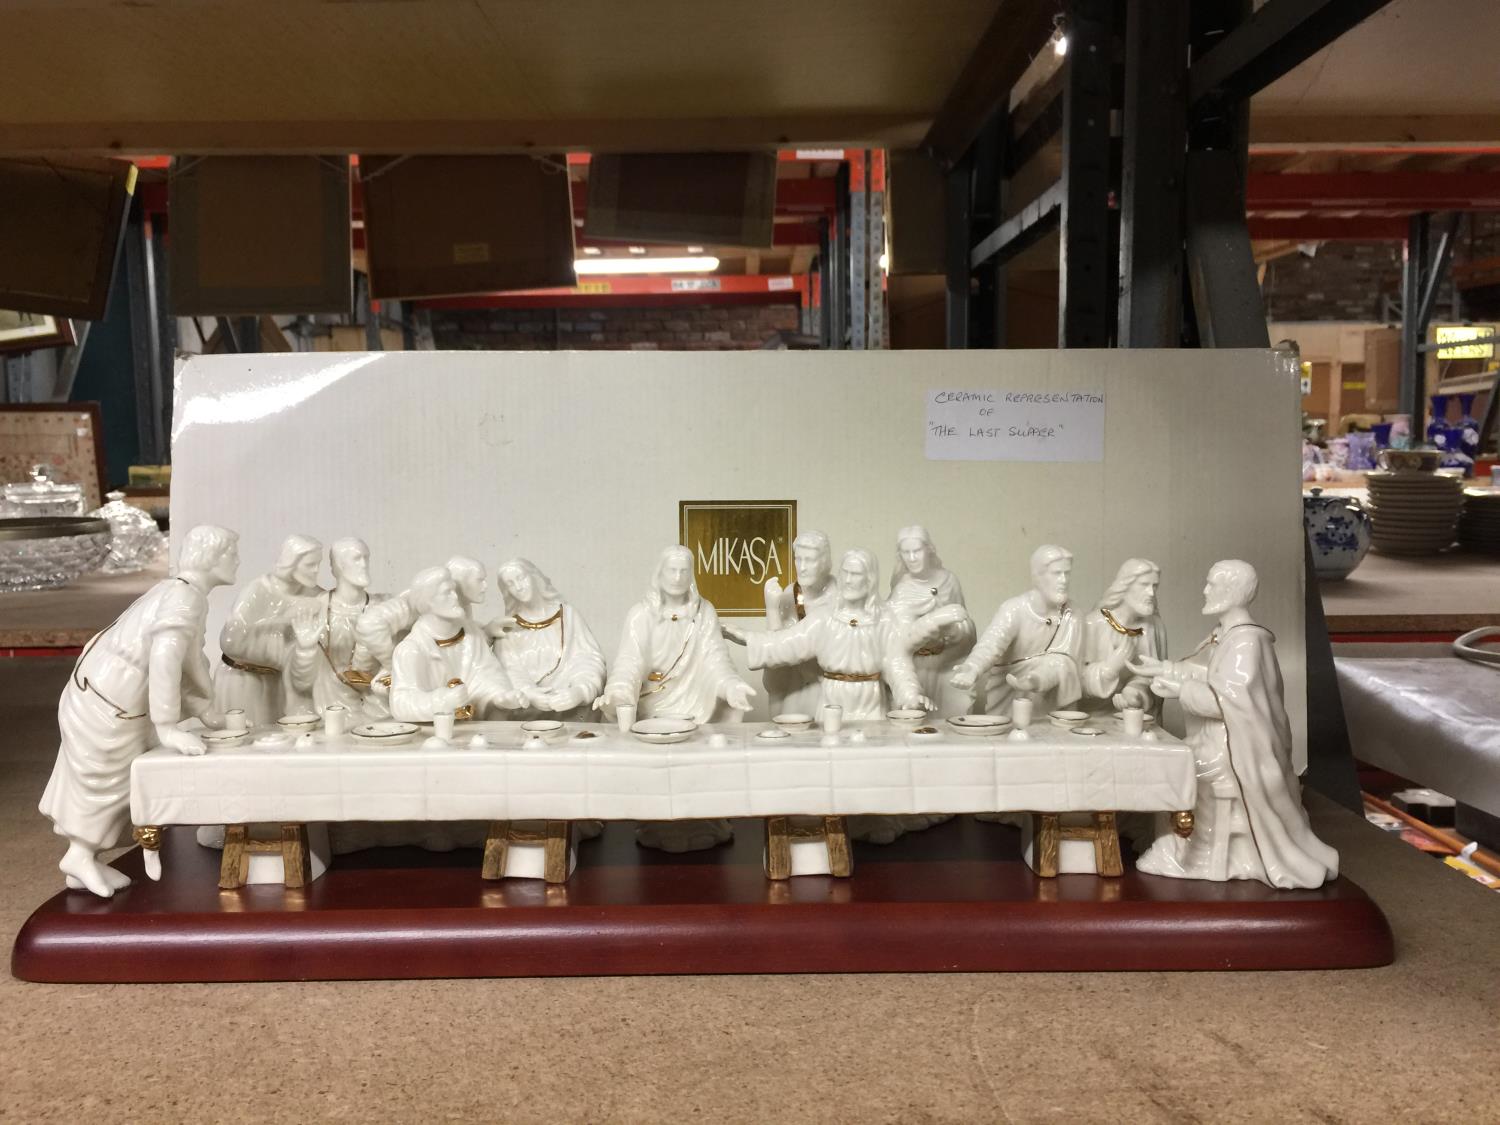 A CERAMIC REPRESENTATION OF JESUS CHRIST WITH HIS DISCIPLES AT THE LAST SUPPER BY MIKASA